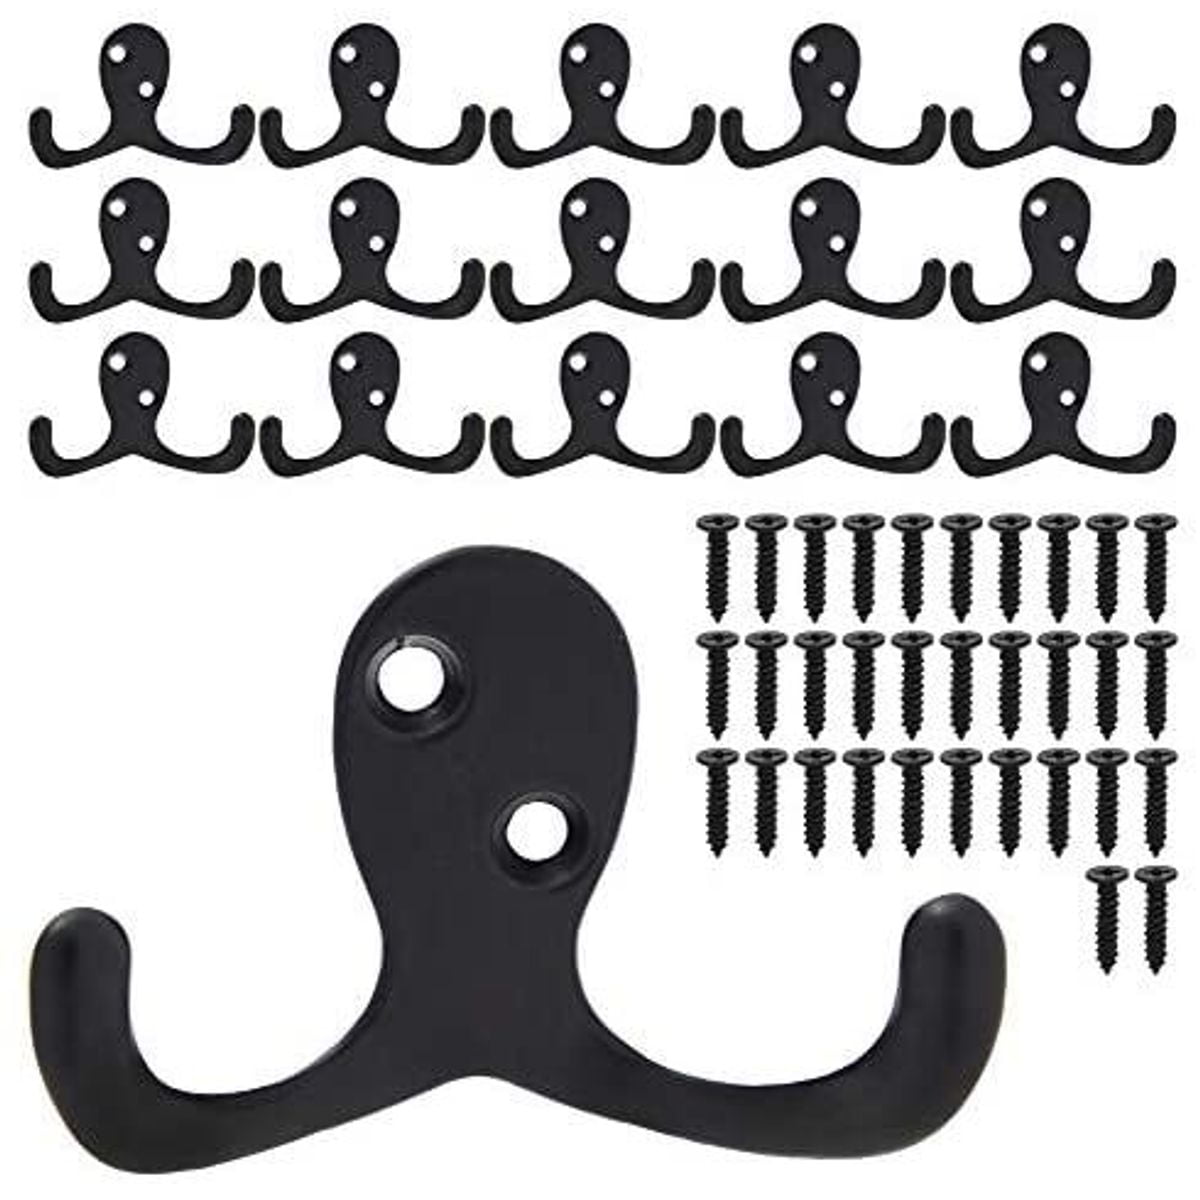 Details about   Homentum Decorative Coat Hooks for Wall Wall Mounted Children’s Hangers Metal 